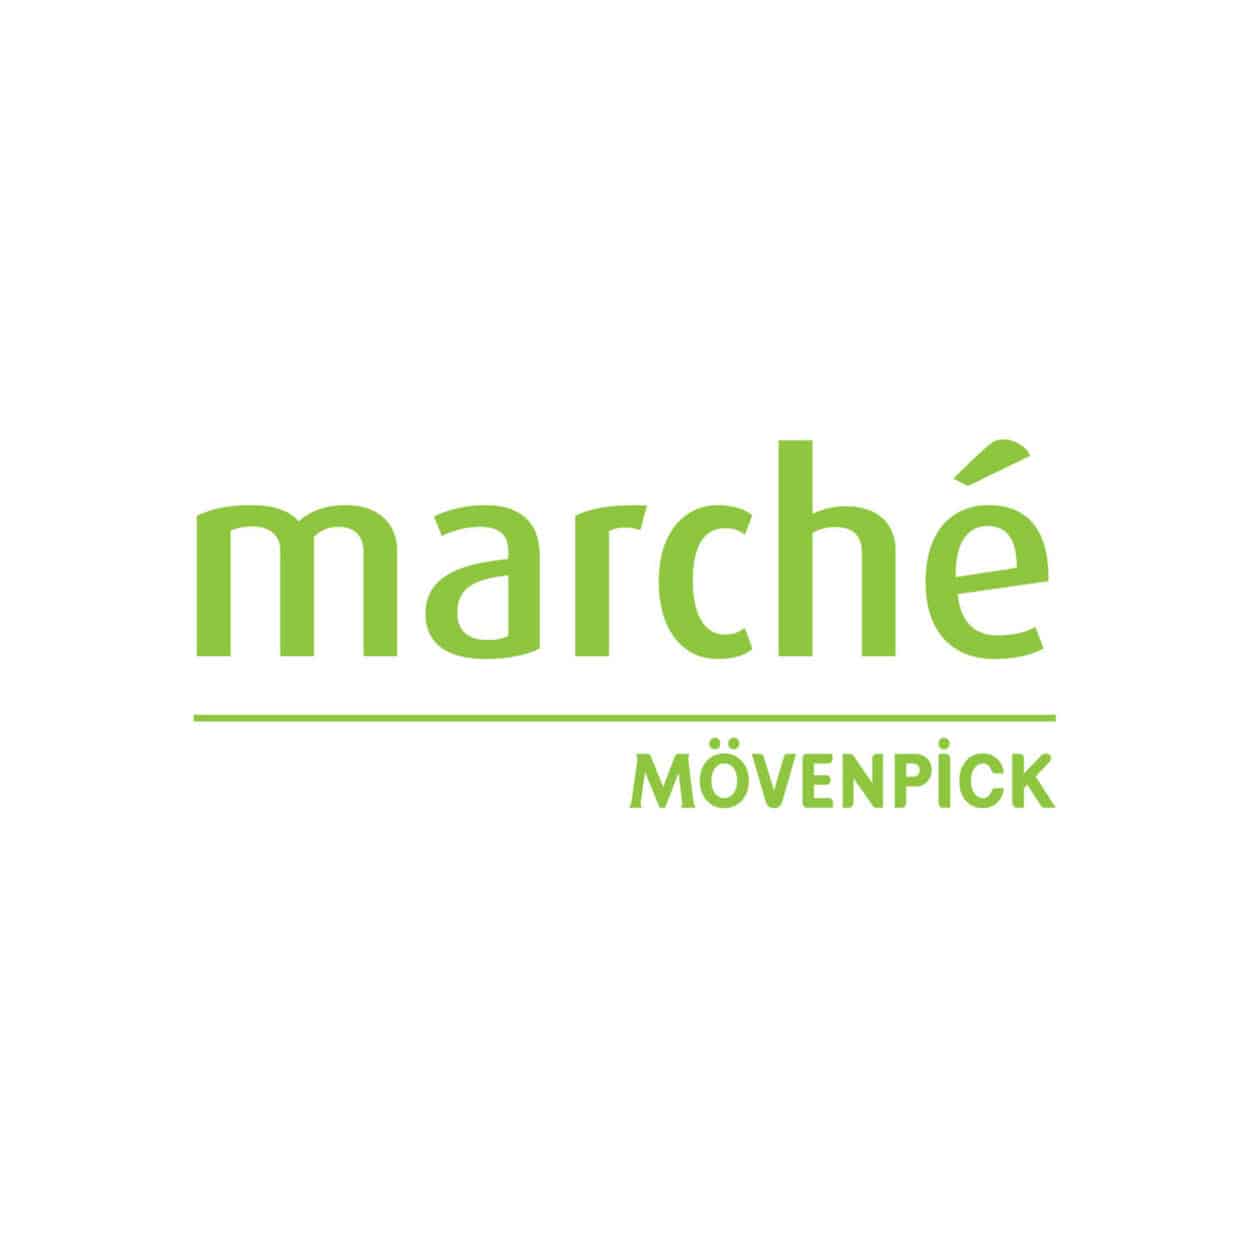 Buy marche E Gift Card in Singapore